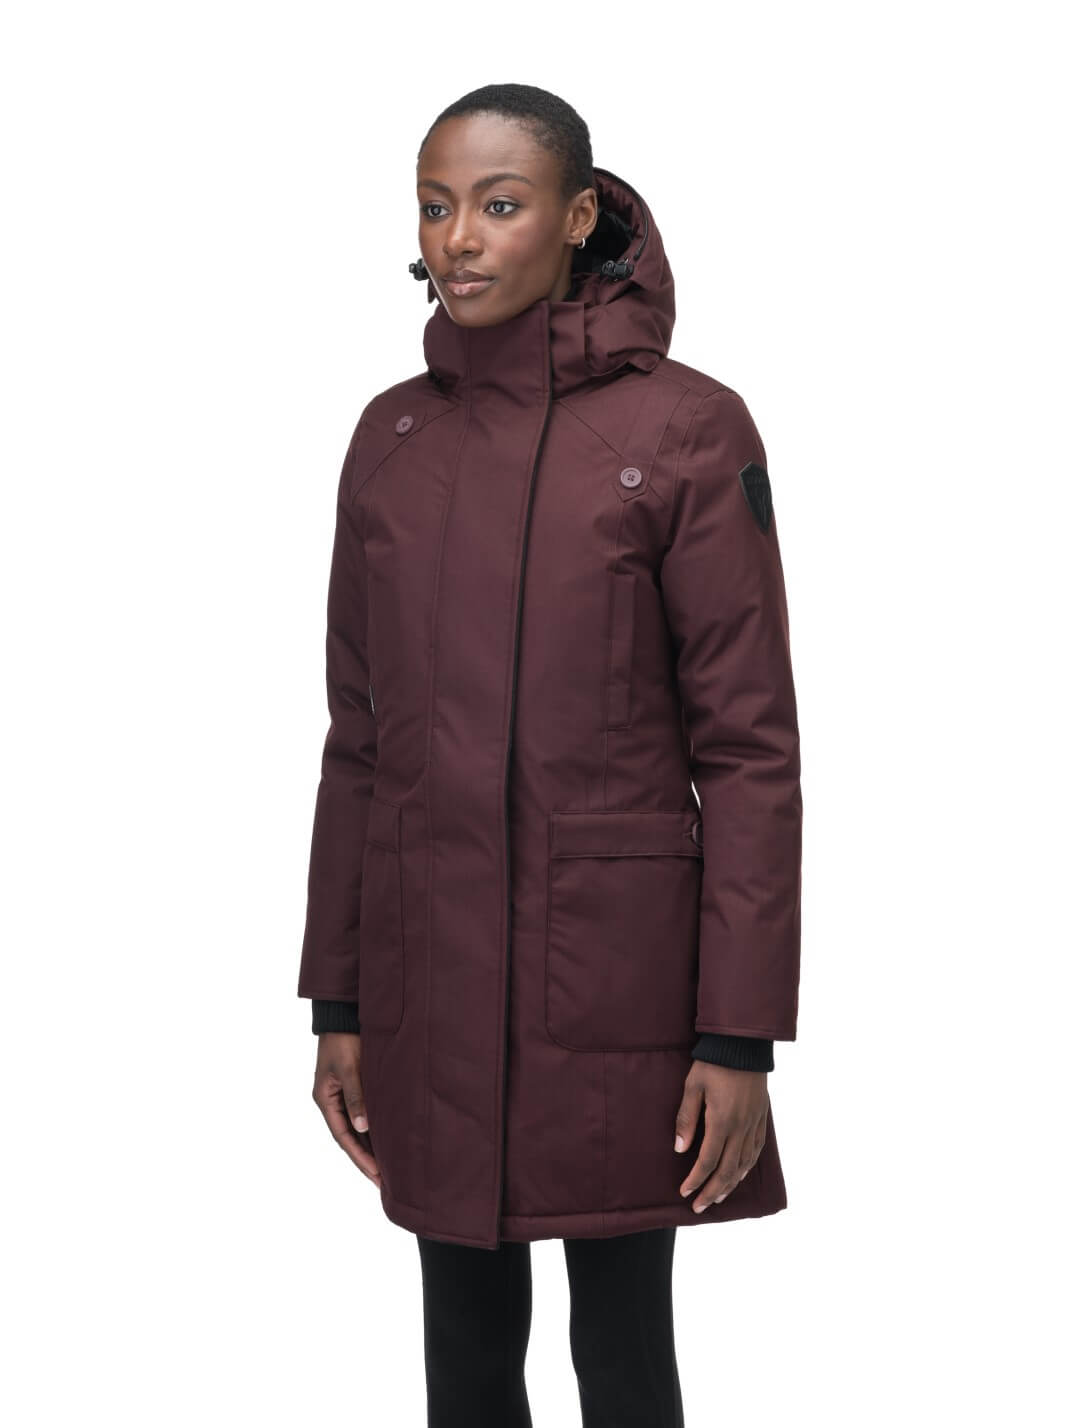 Best selling women's down filled knee length parka with removable down filled hood in Merlot